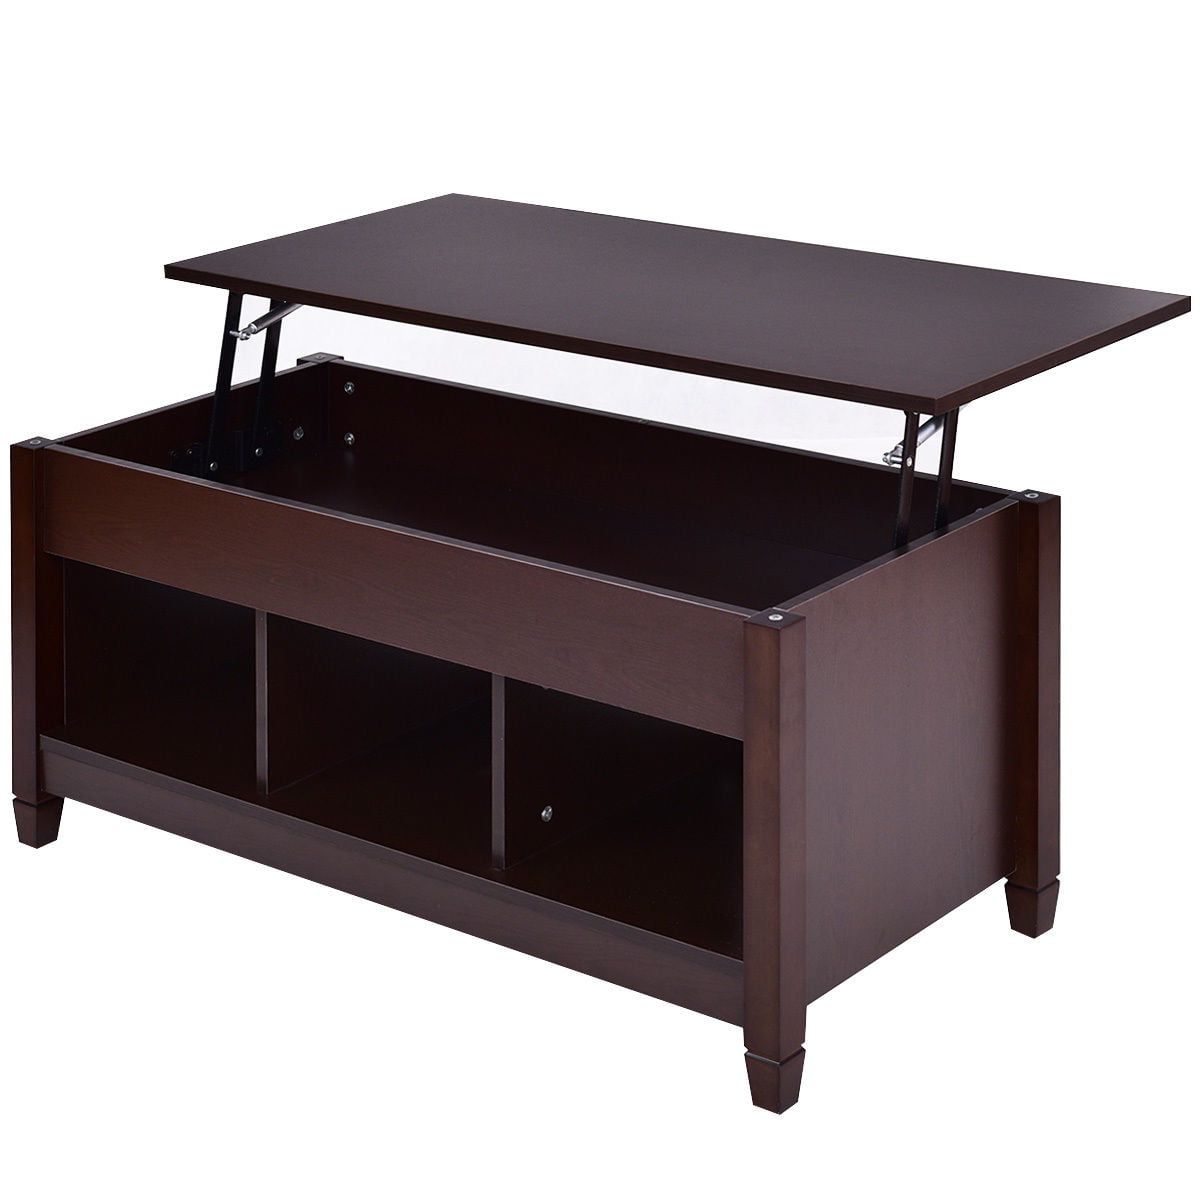 Costway Lift Top Coffee Table W/ Hidden Compartment And Storage Shelves In Fashionable Lift Top Coffee Tables With Hidden Storage Compartments (View 11 of 15)